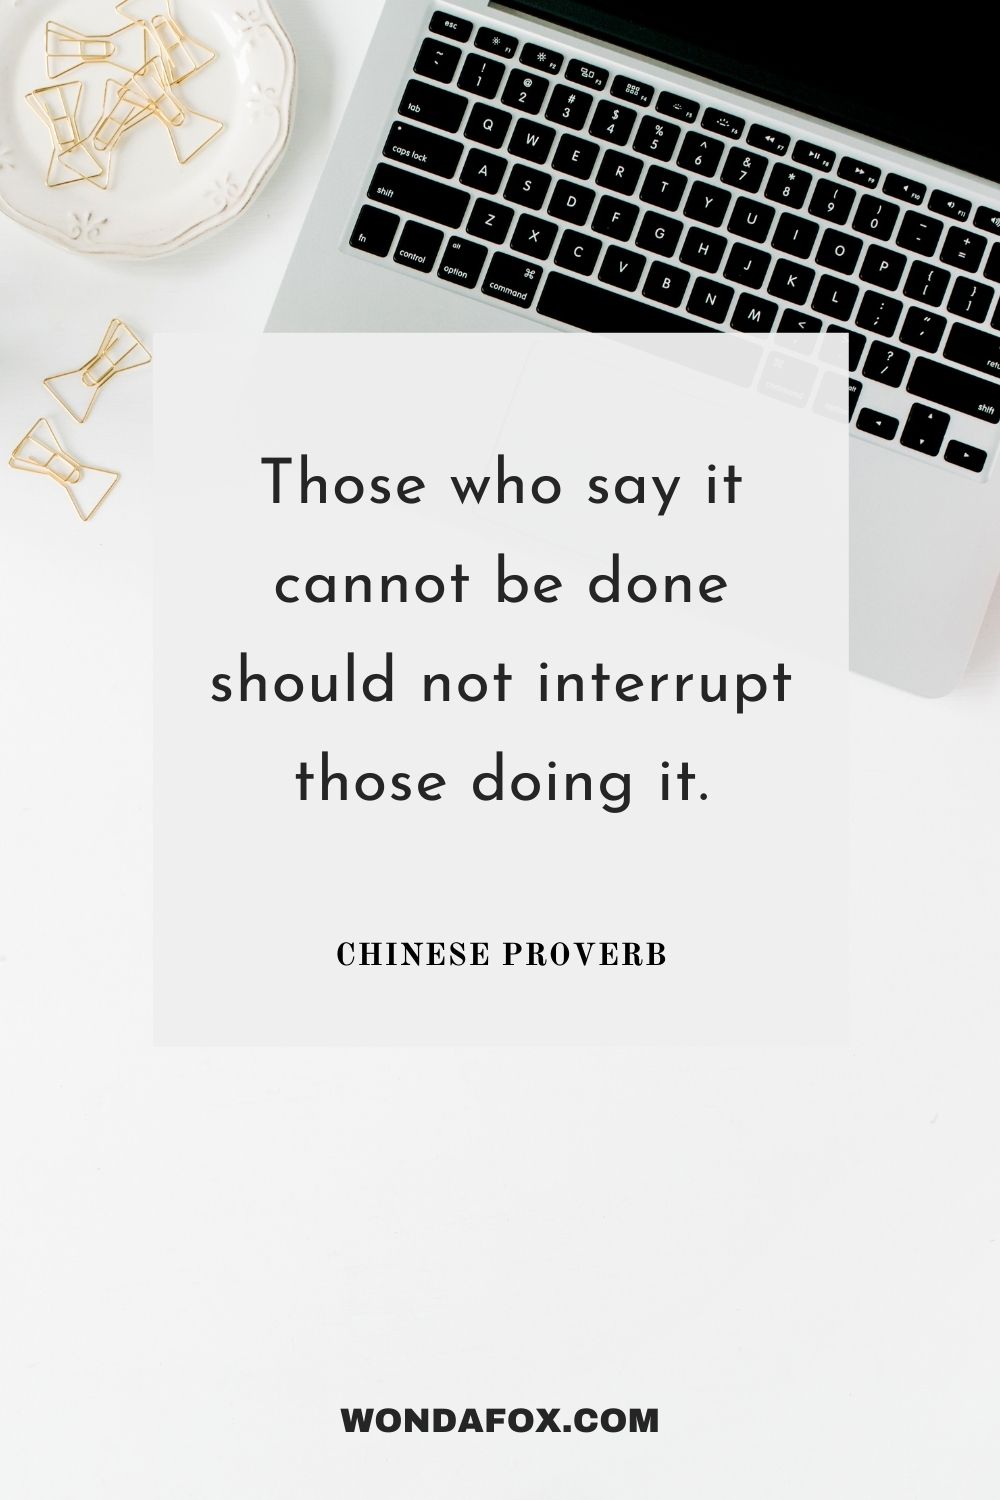 Those who say it cannot be done should not interrupt those doing it.